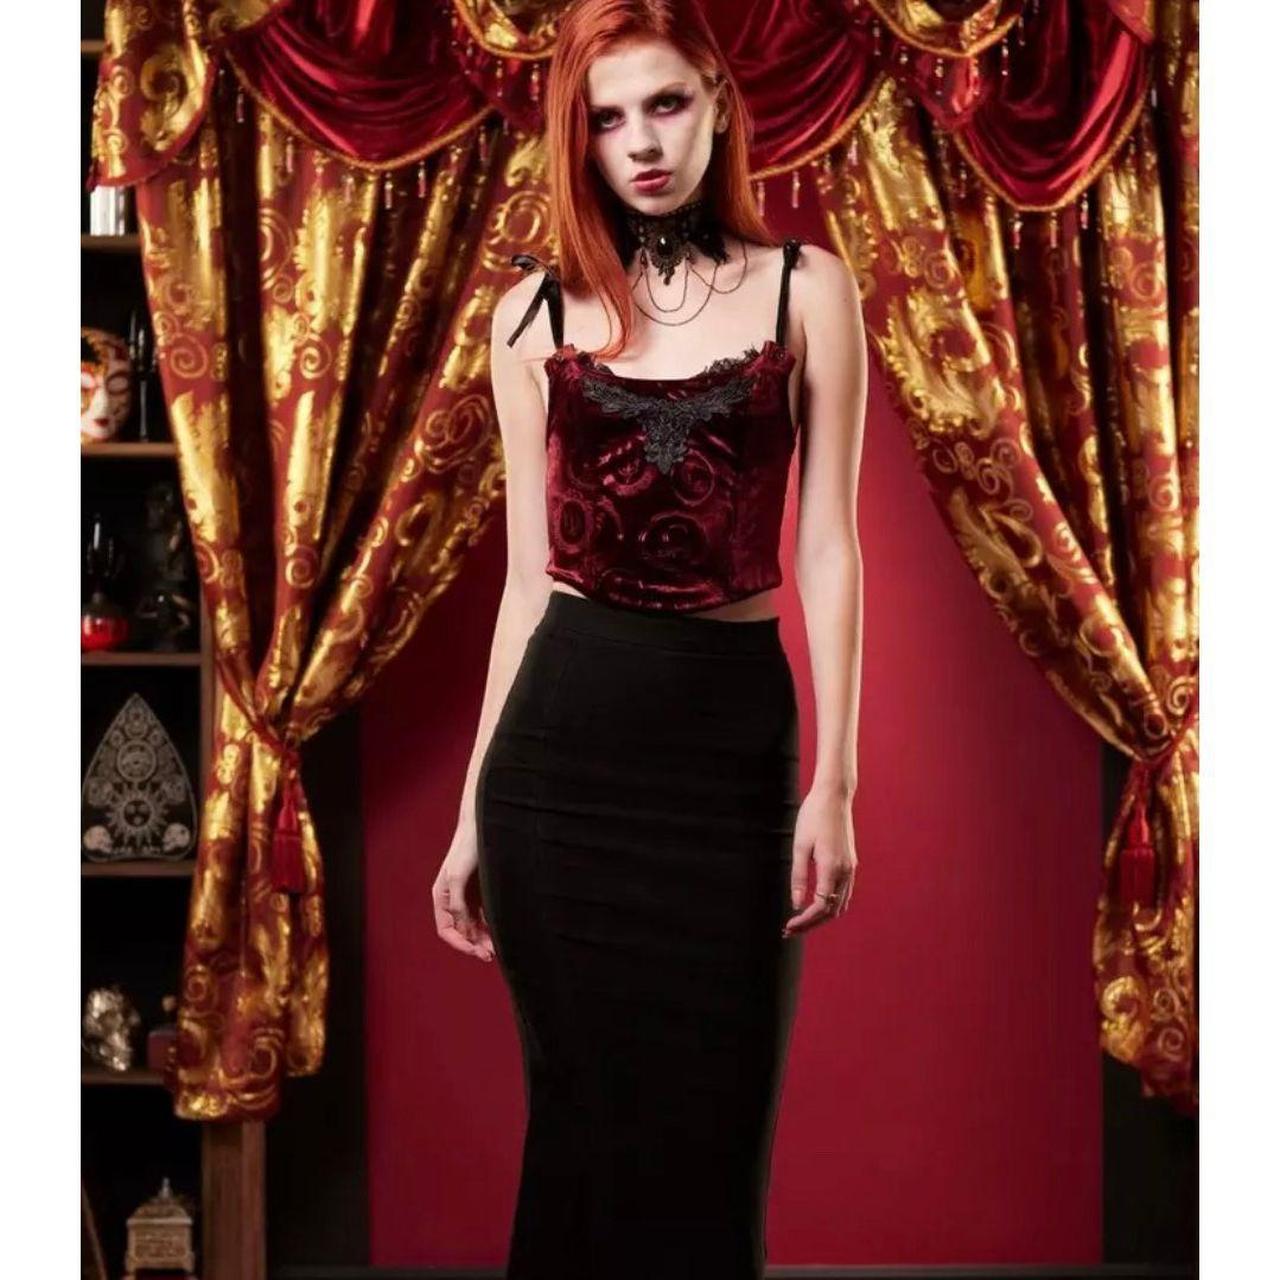 Interview With The Vampire Velvet Lace Girls Corset